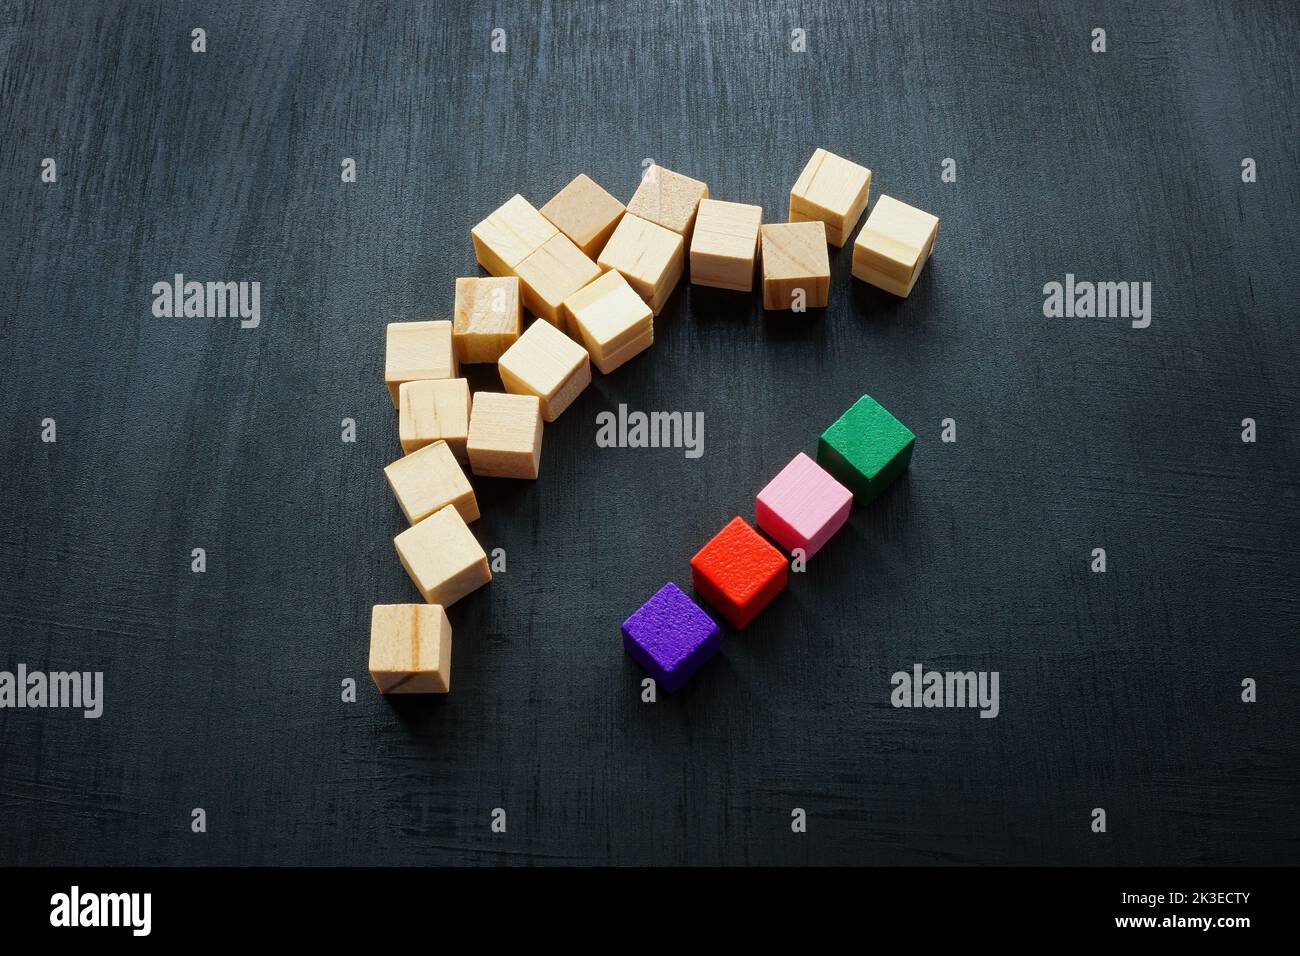 Colorful cubes and wooden around them. Diversity equity and inclusion concept. Stock Photo